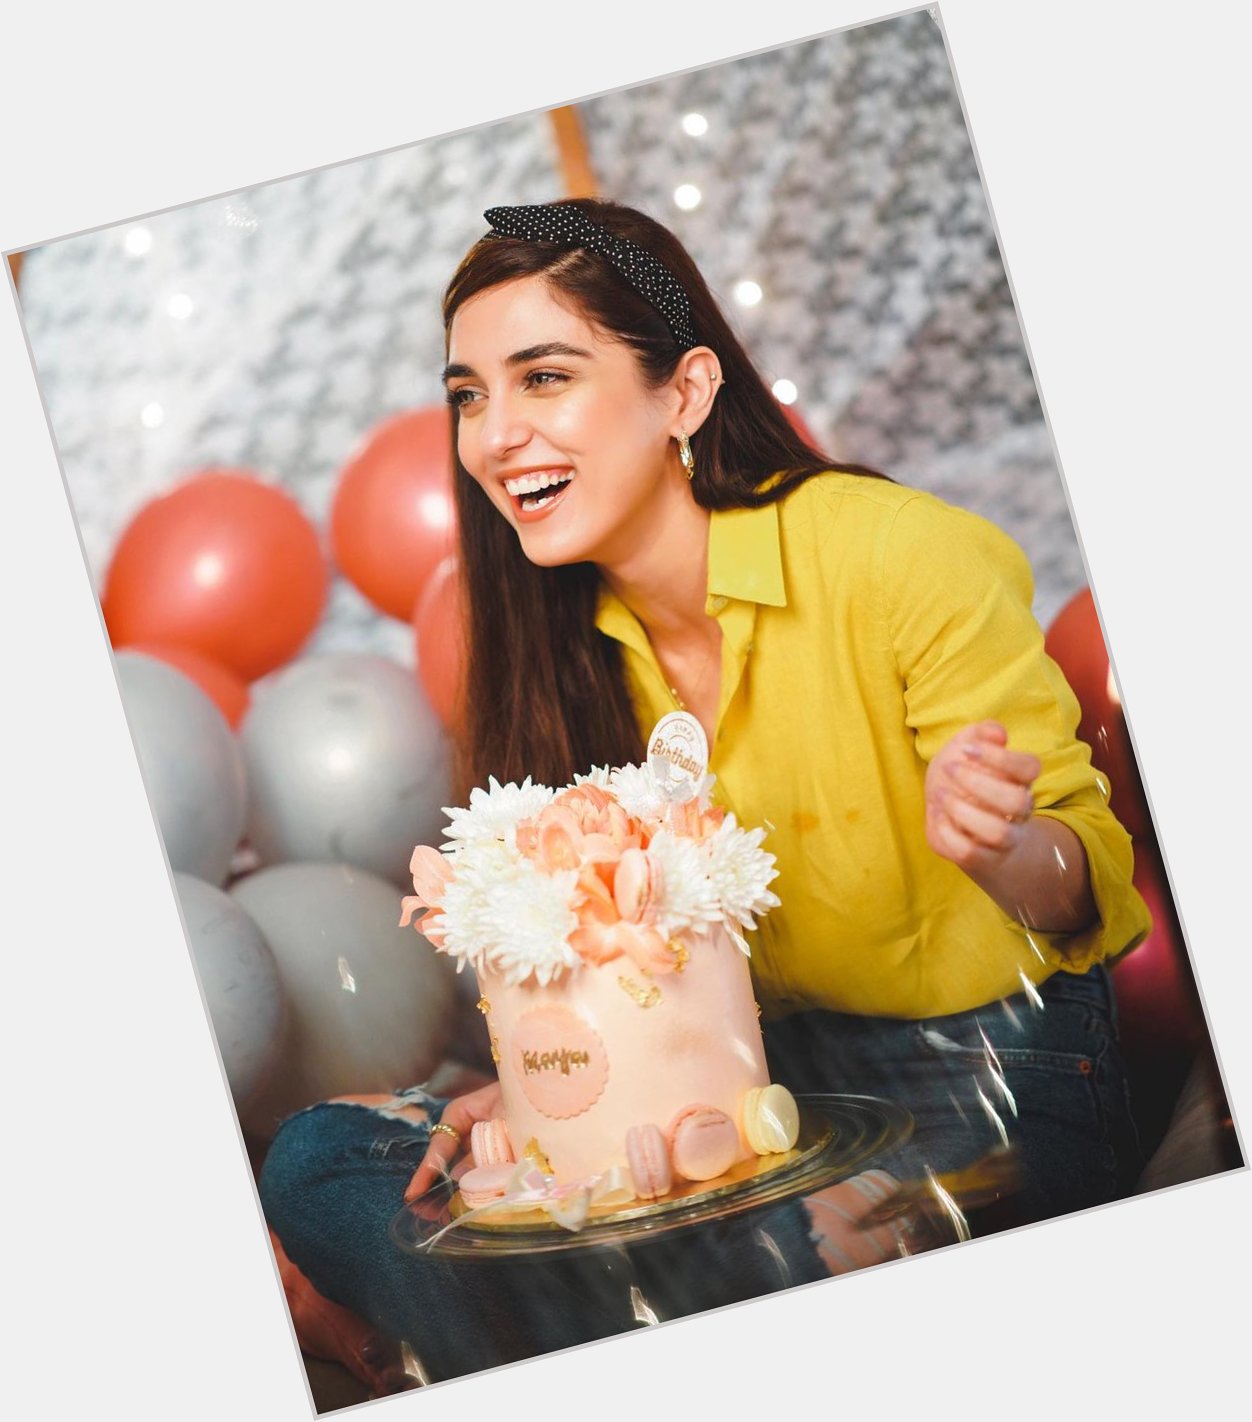 Maya Ali shares a colorful picture on her birthday  Happy Birthday Maya jee  